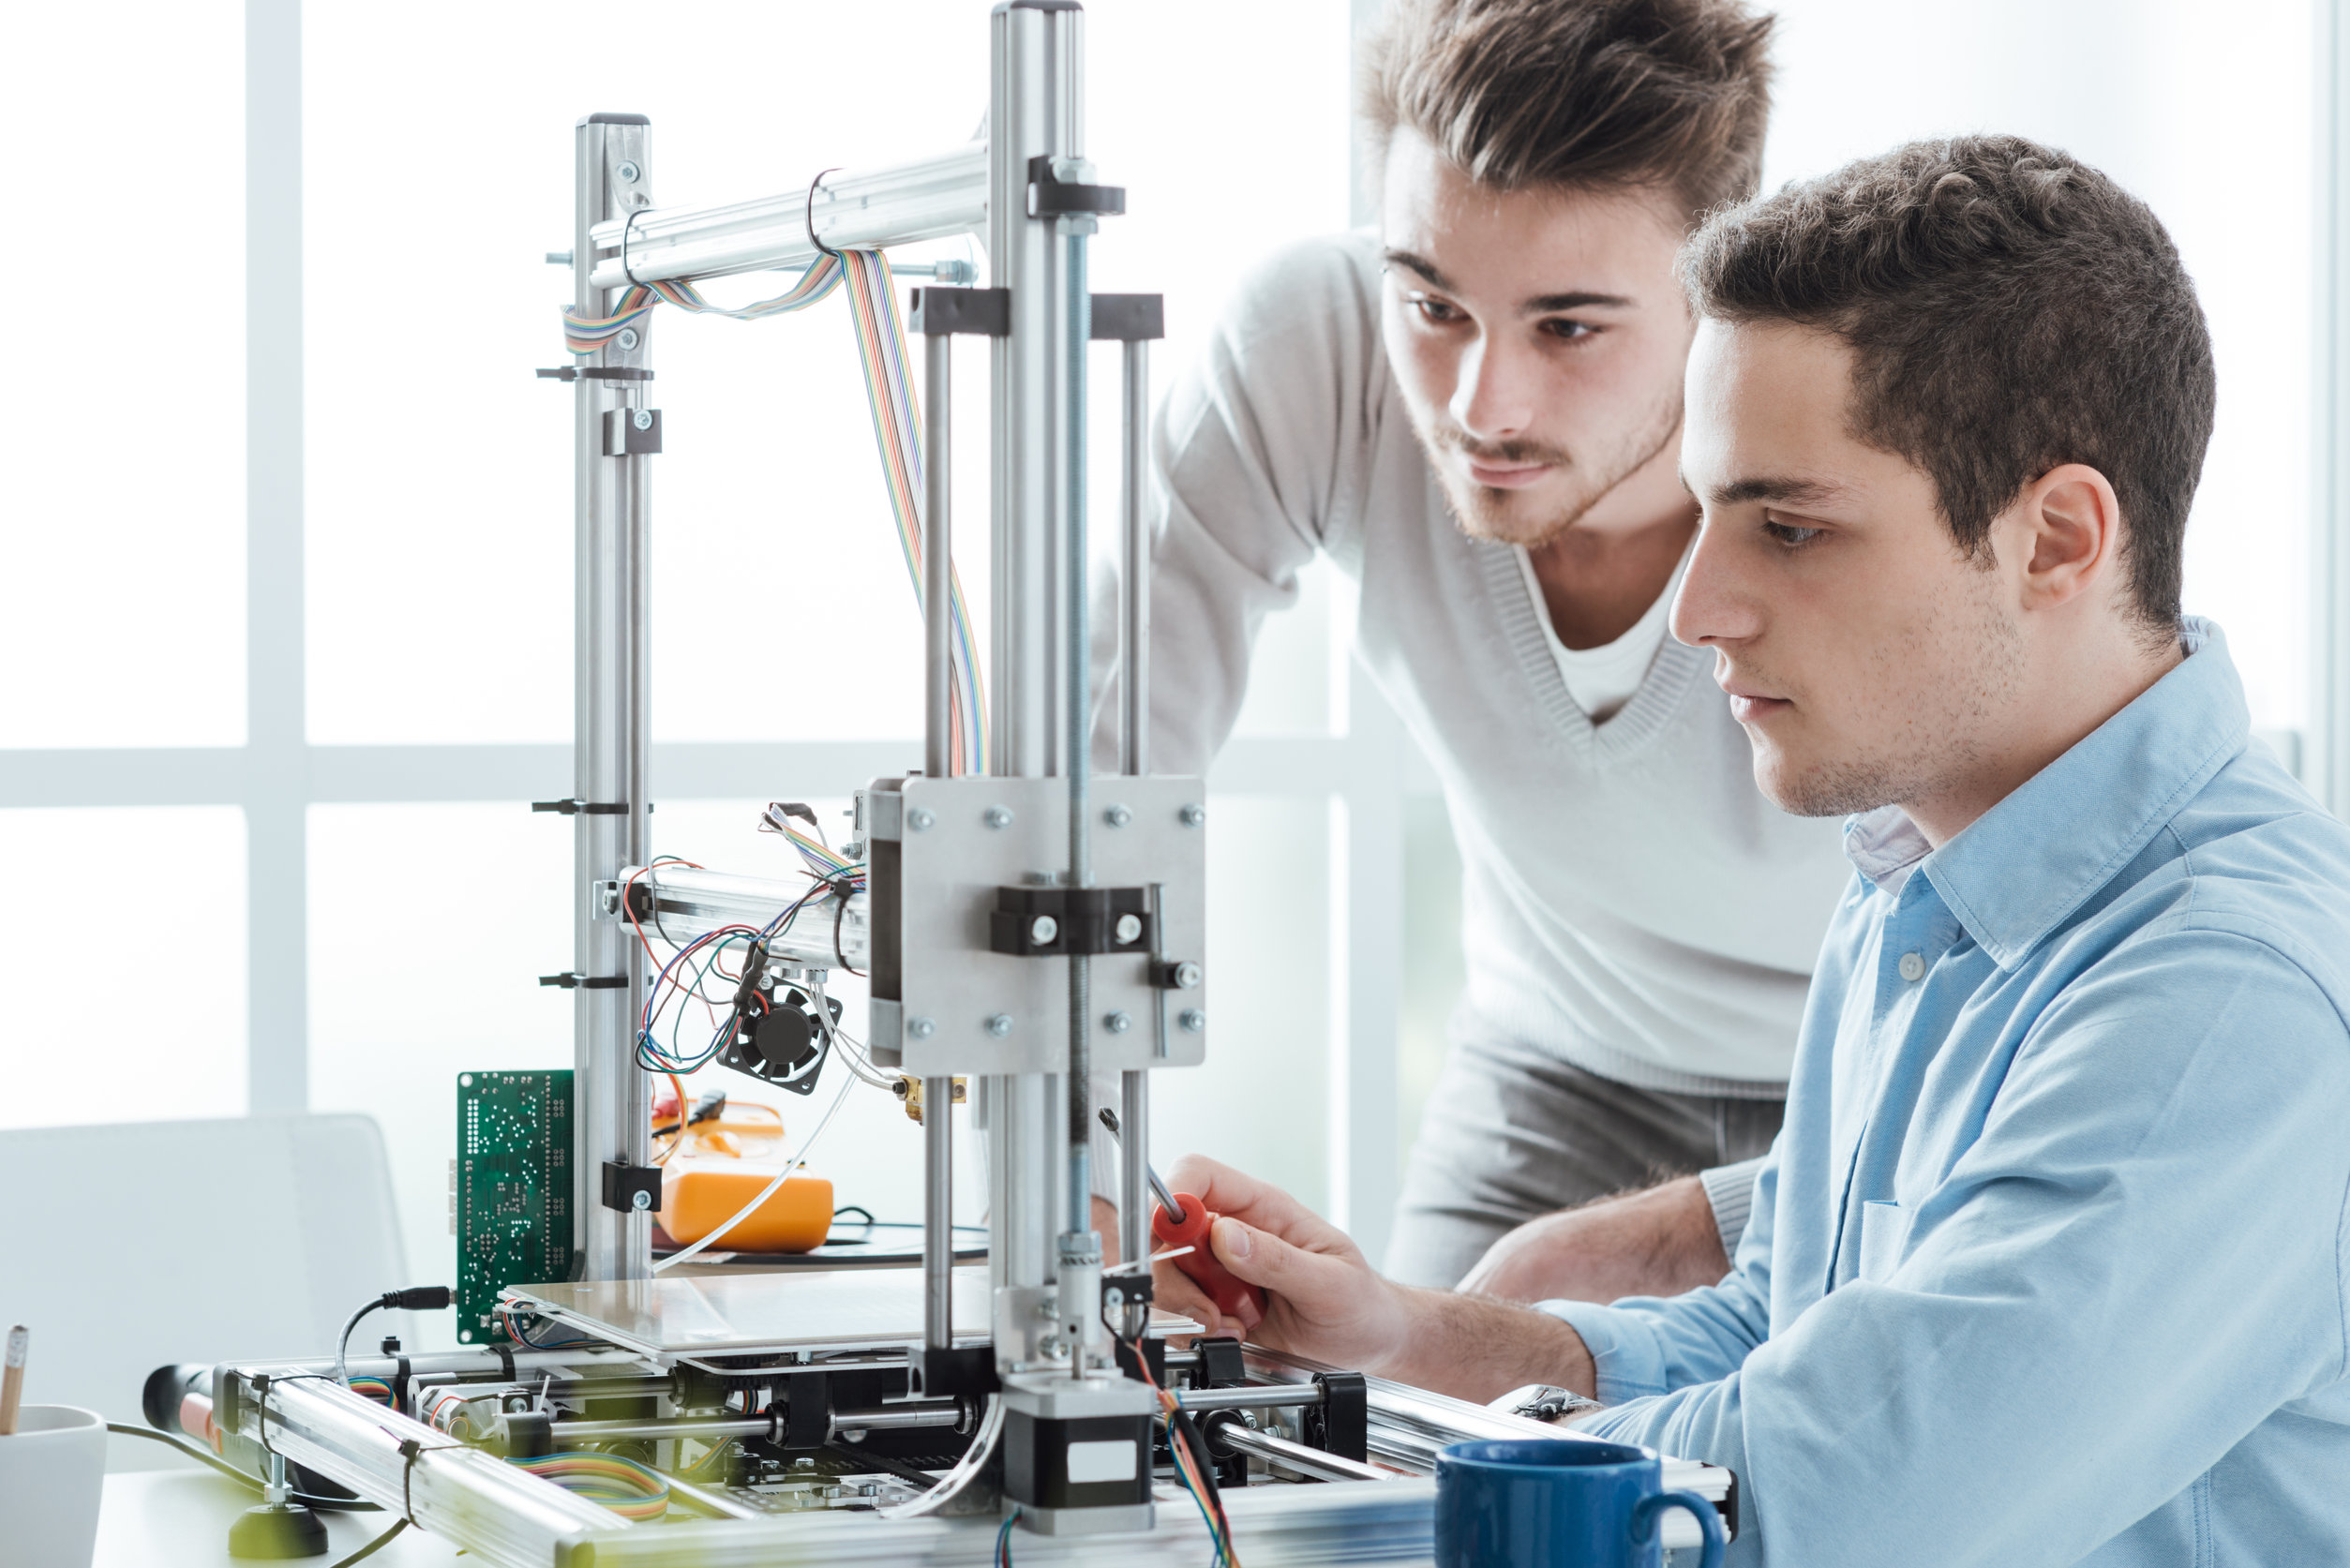 Young students in the laboratory using a 3D printer, technology and education concept